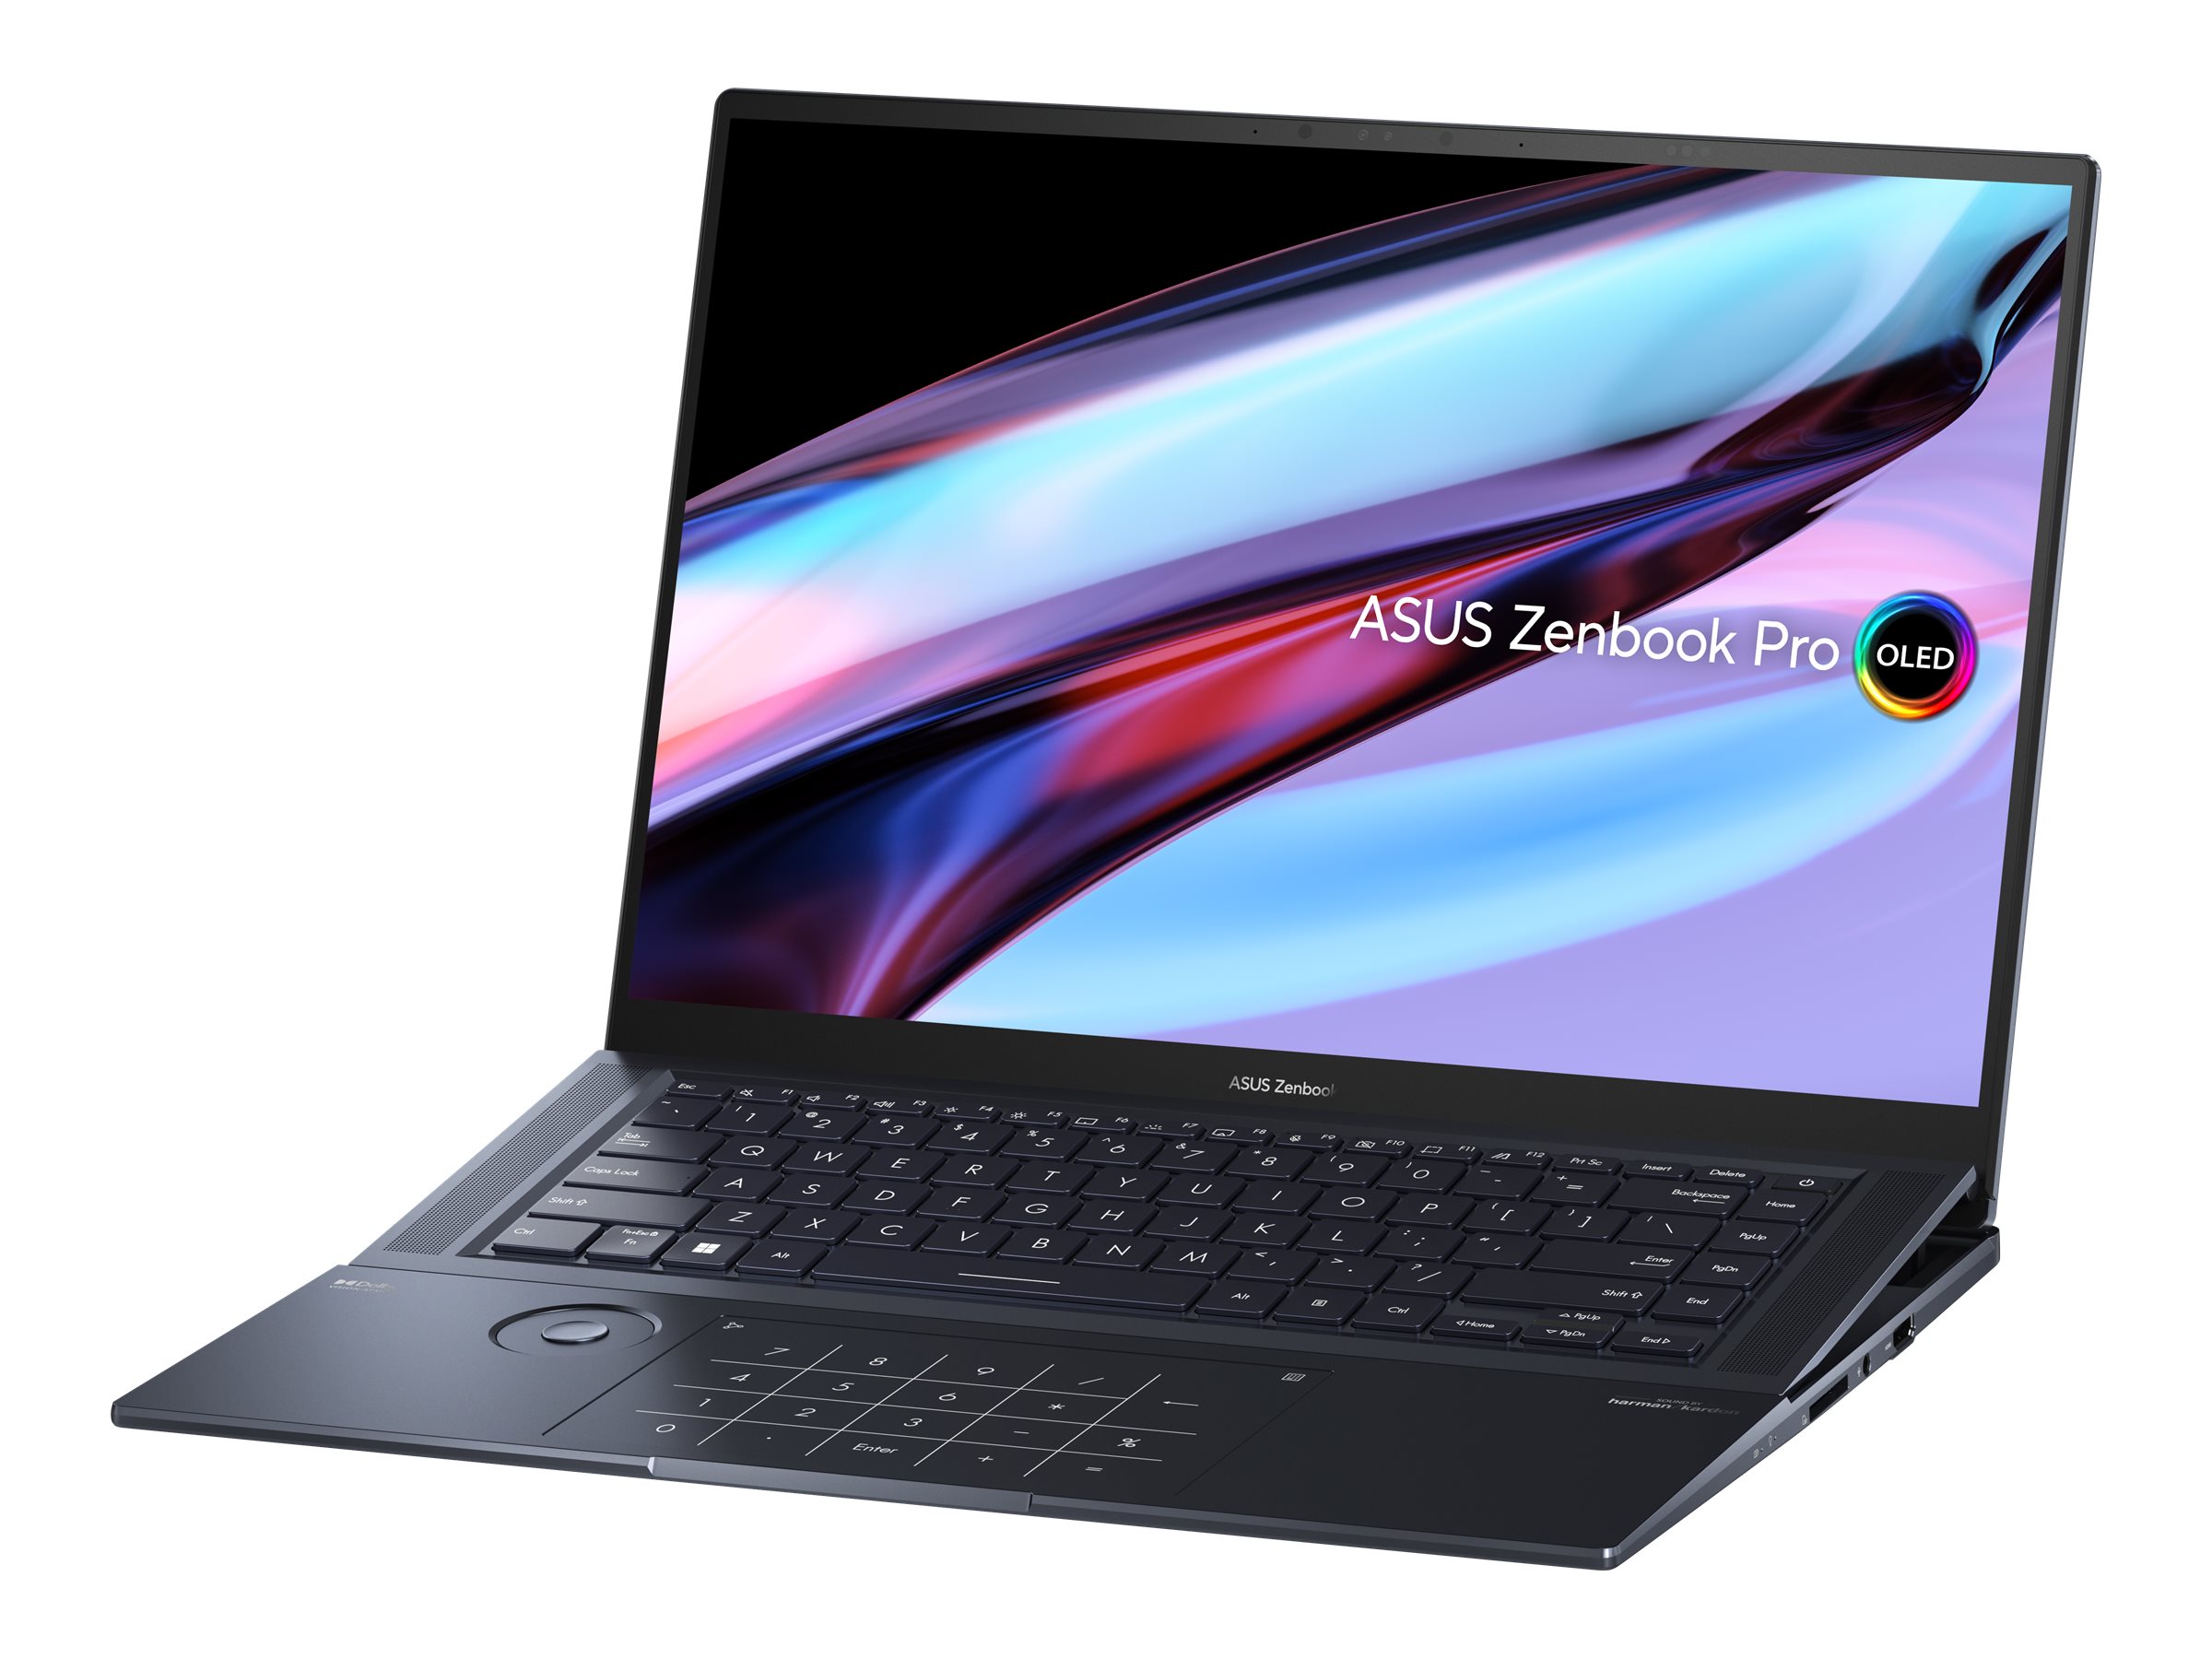 Asus Zenbook 15 OLED review: Widescreen entertainment - Can Buy or Not